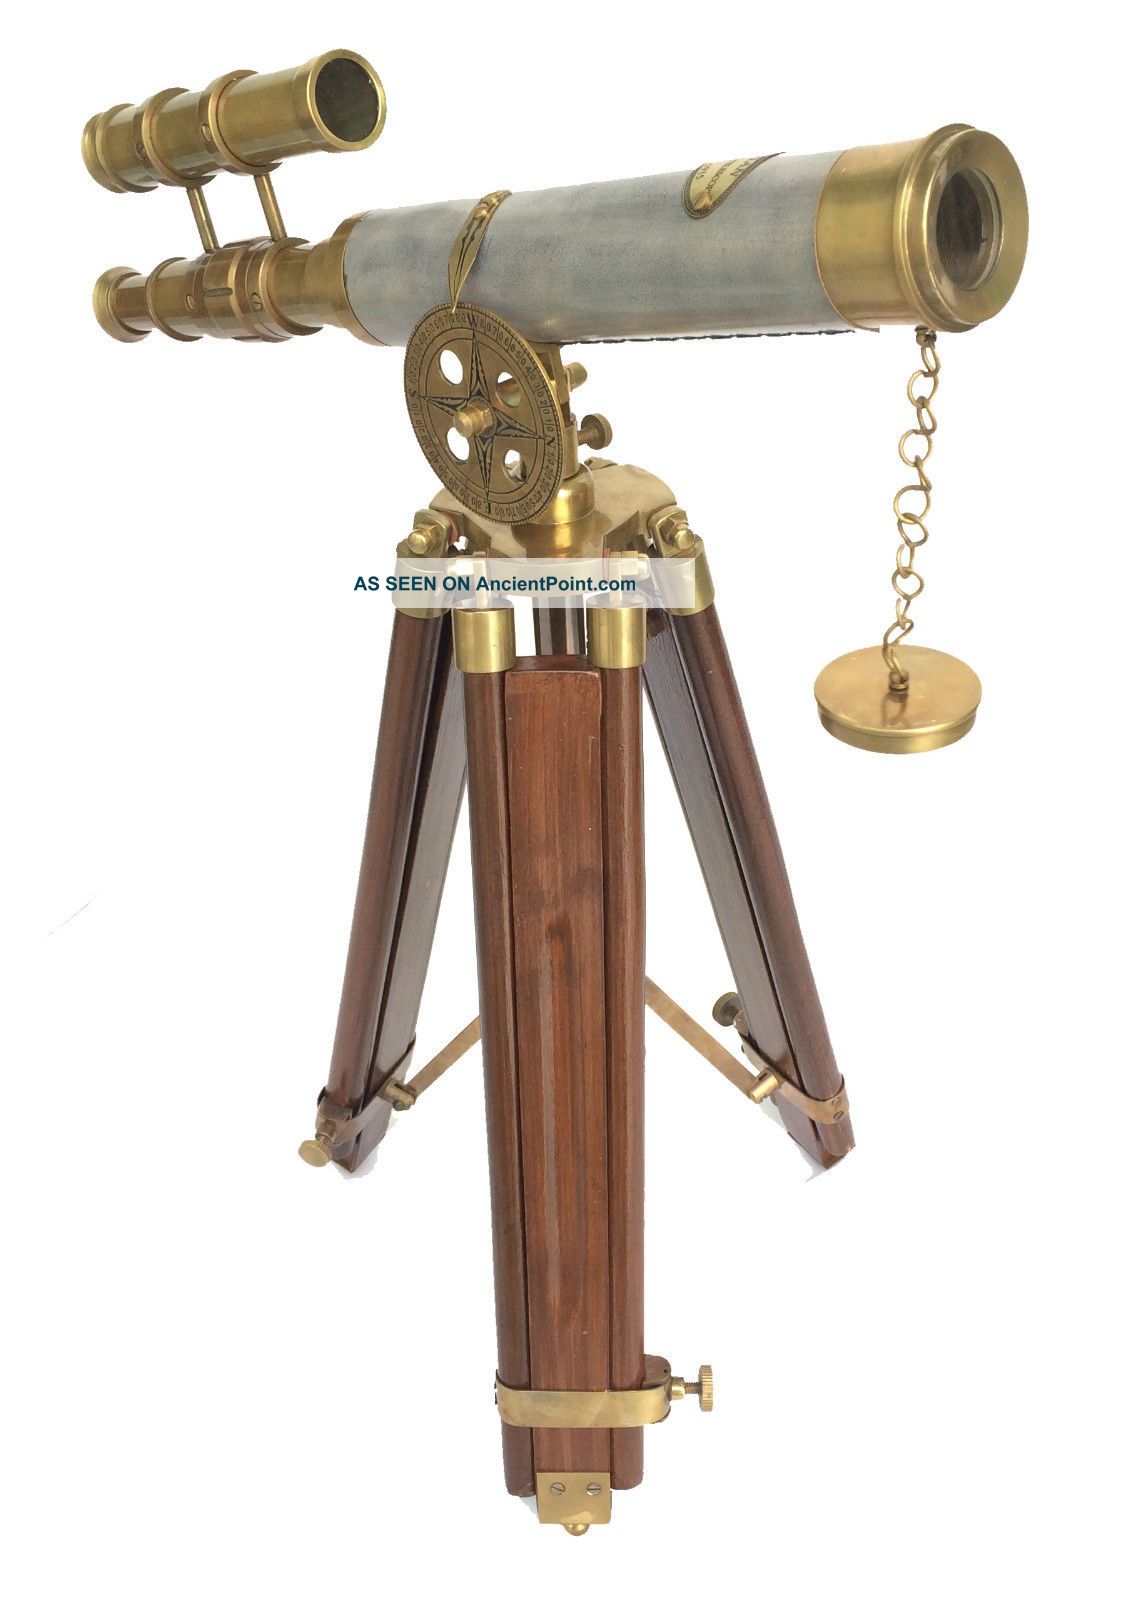 Antique Nautical Brass Leather Double Barrel Telescope Vintage Wooden Stand Telescopes photo